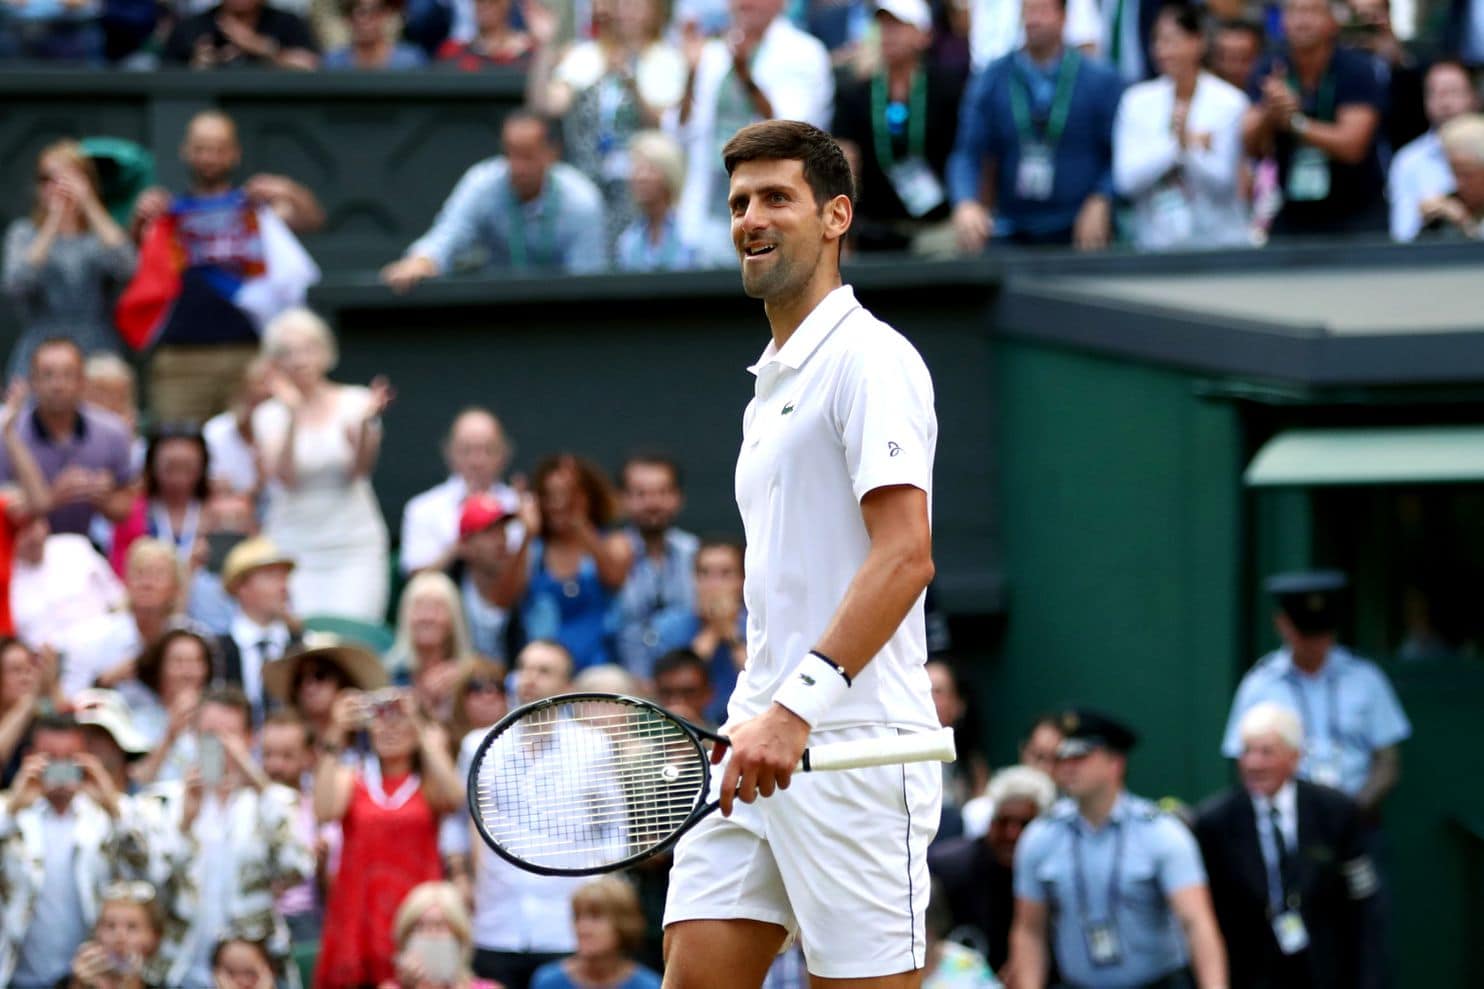 Novak Djokovic Defeated Roger Federer In Five Sets To Win Record-breaking Wimbledon Final Match